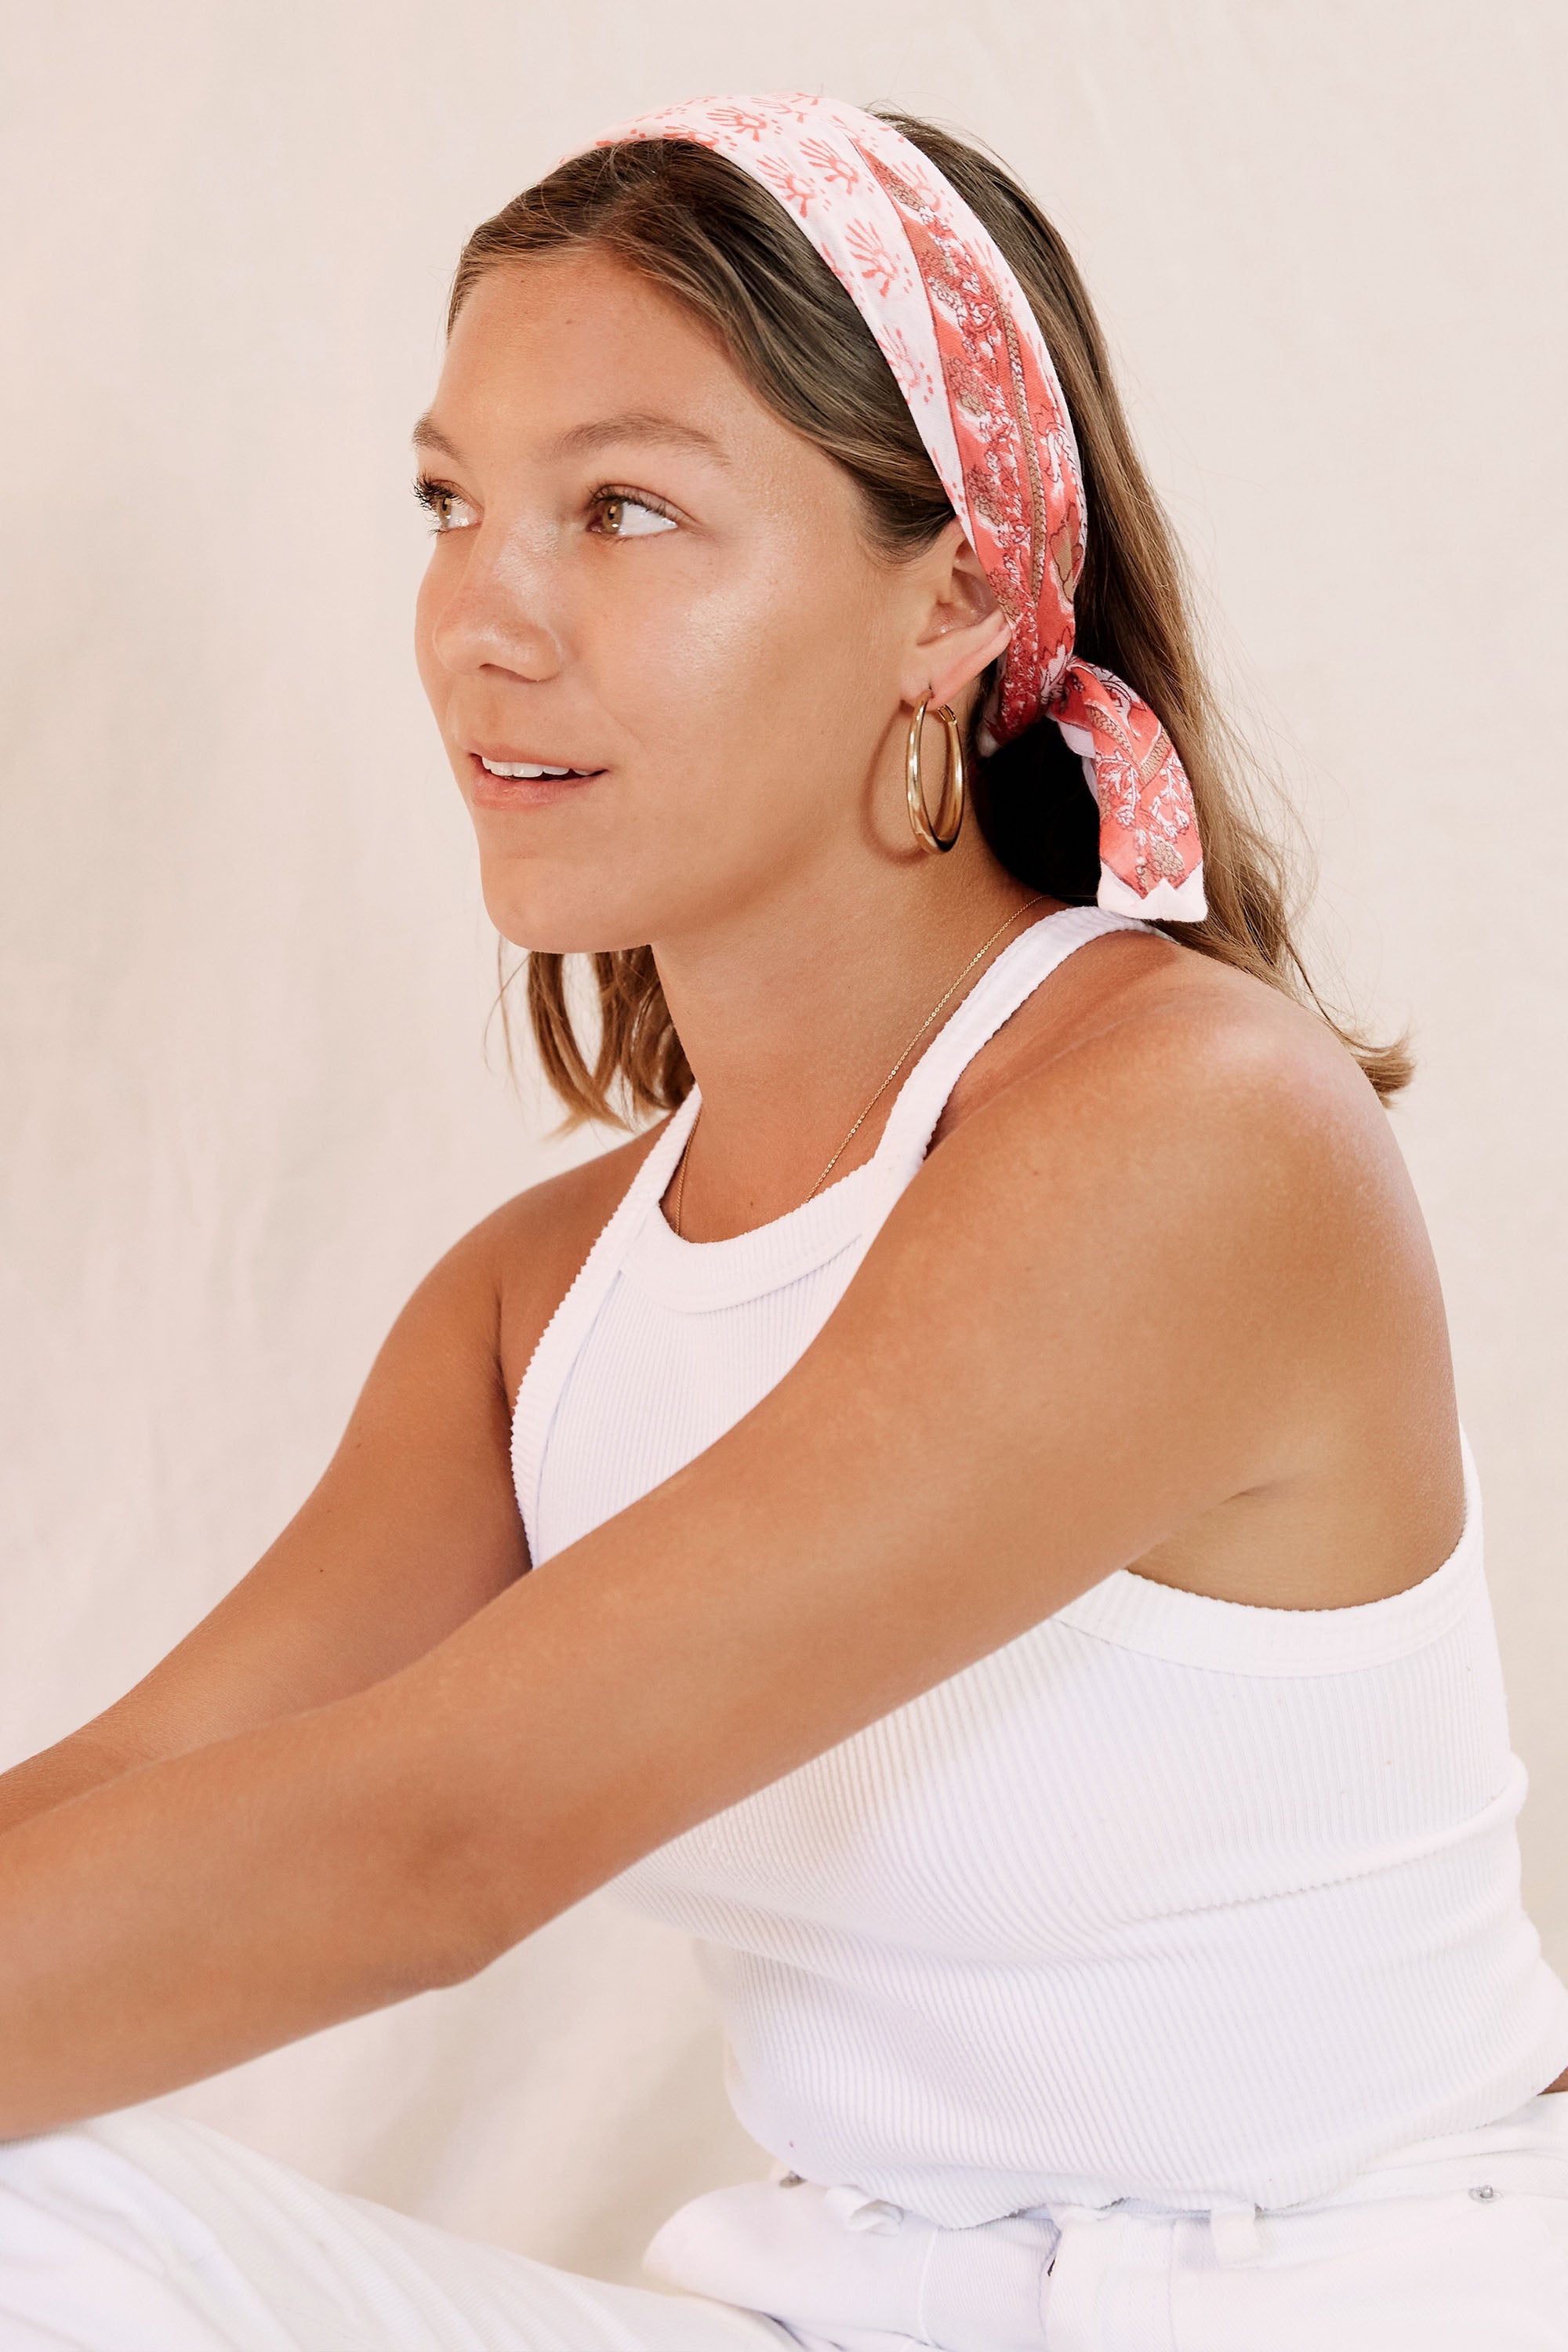 Model wearing the Elsa bandana in her hair as a headband, against a creamish background